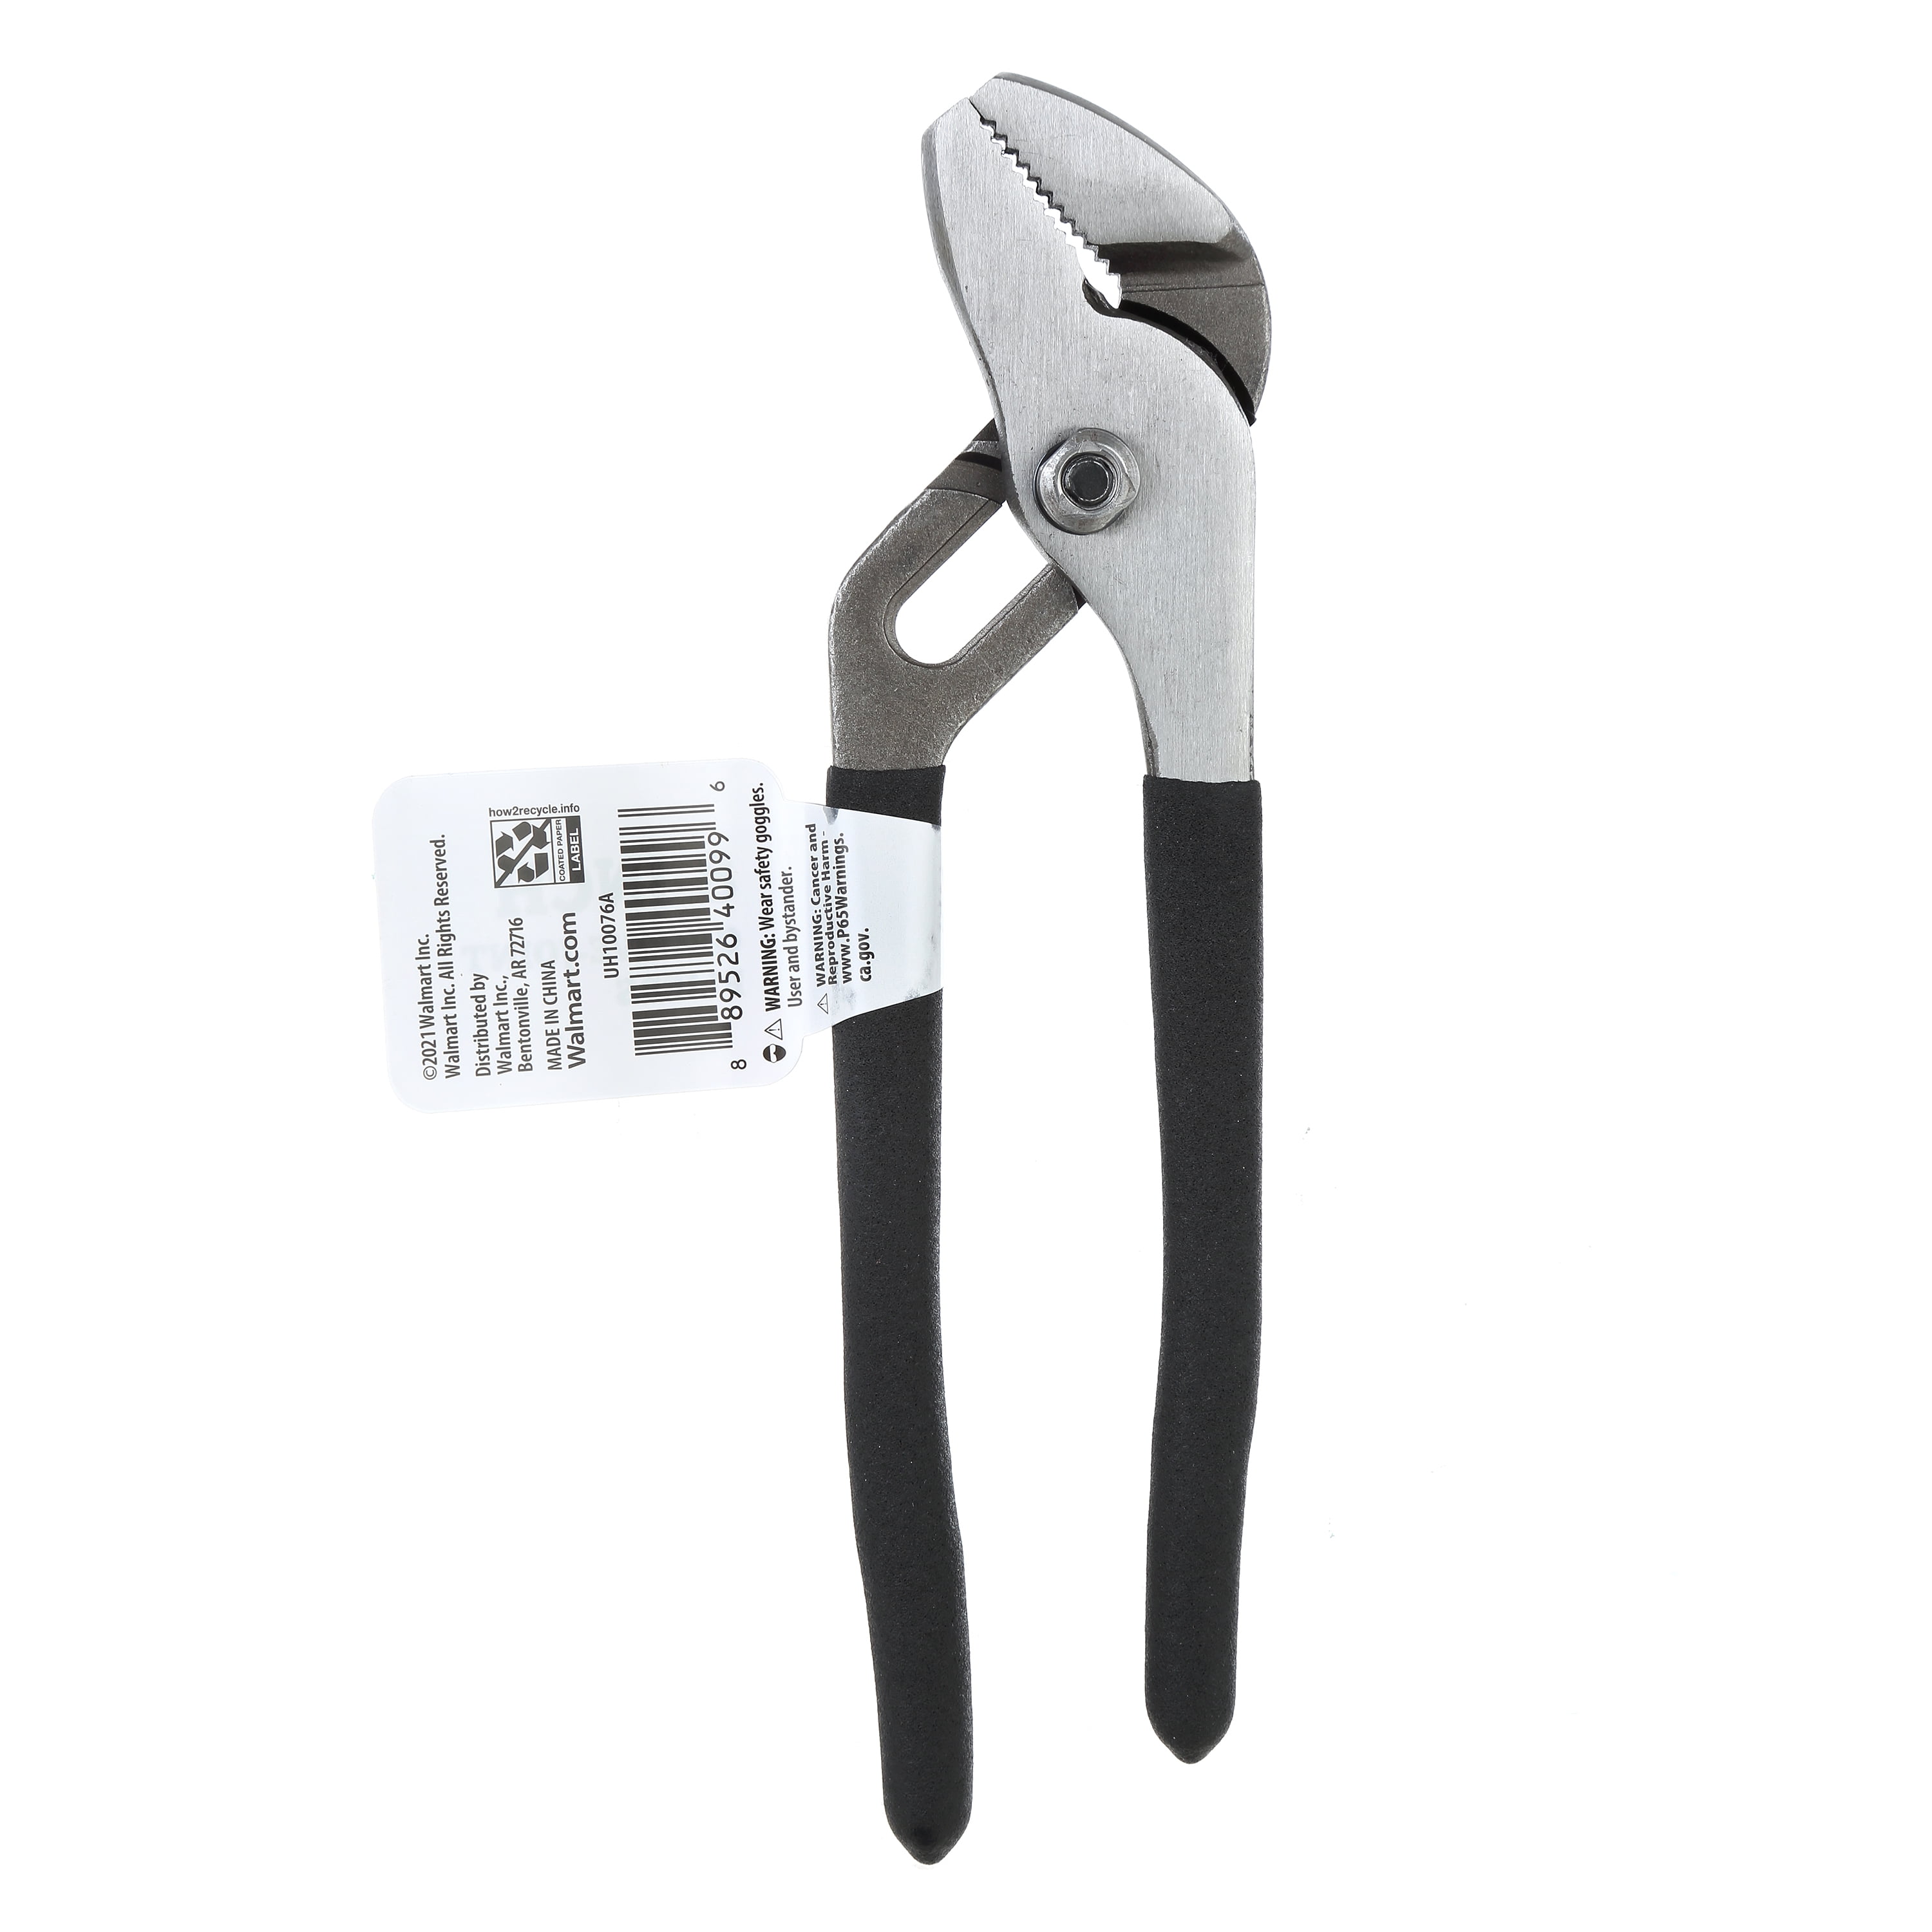 Nonbranded 8 inch Groove Joint Pliers